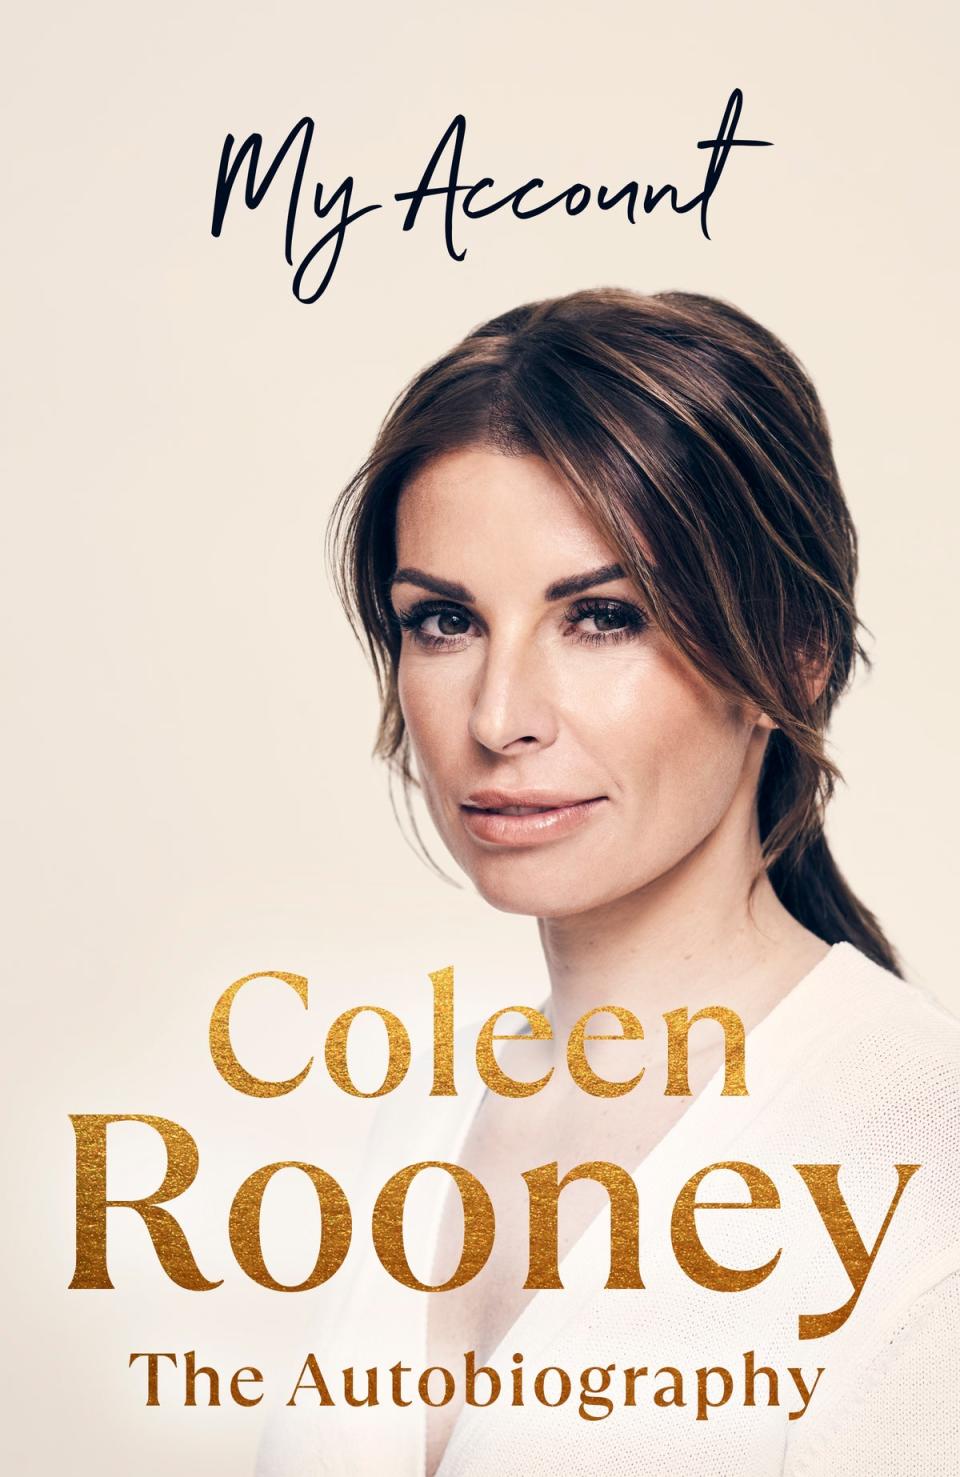 The cover of Coleen Rooney’s ‘My Account’ (Penguin Random House)